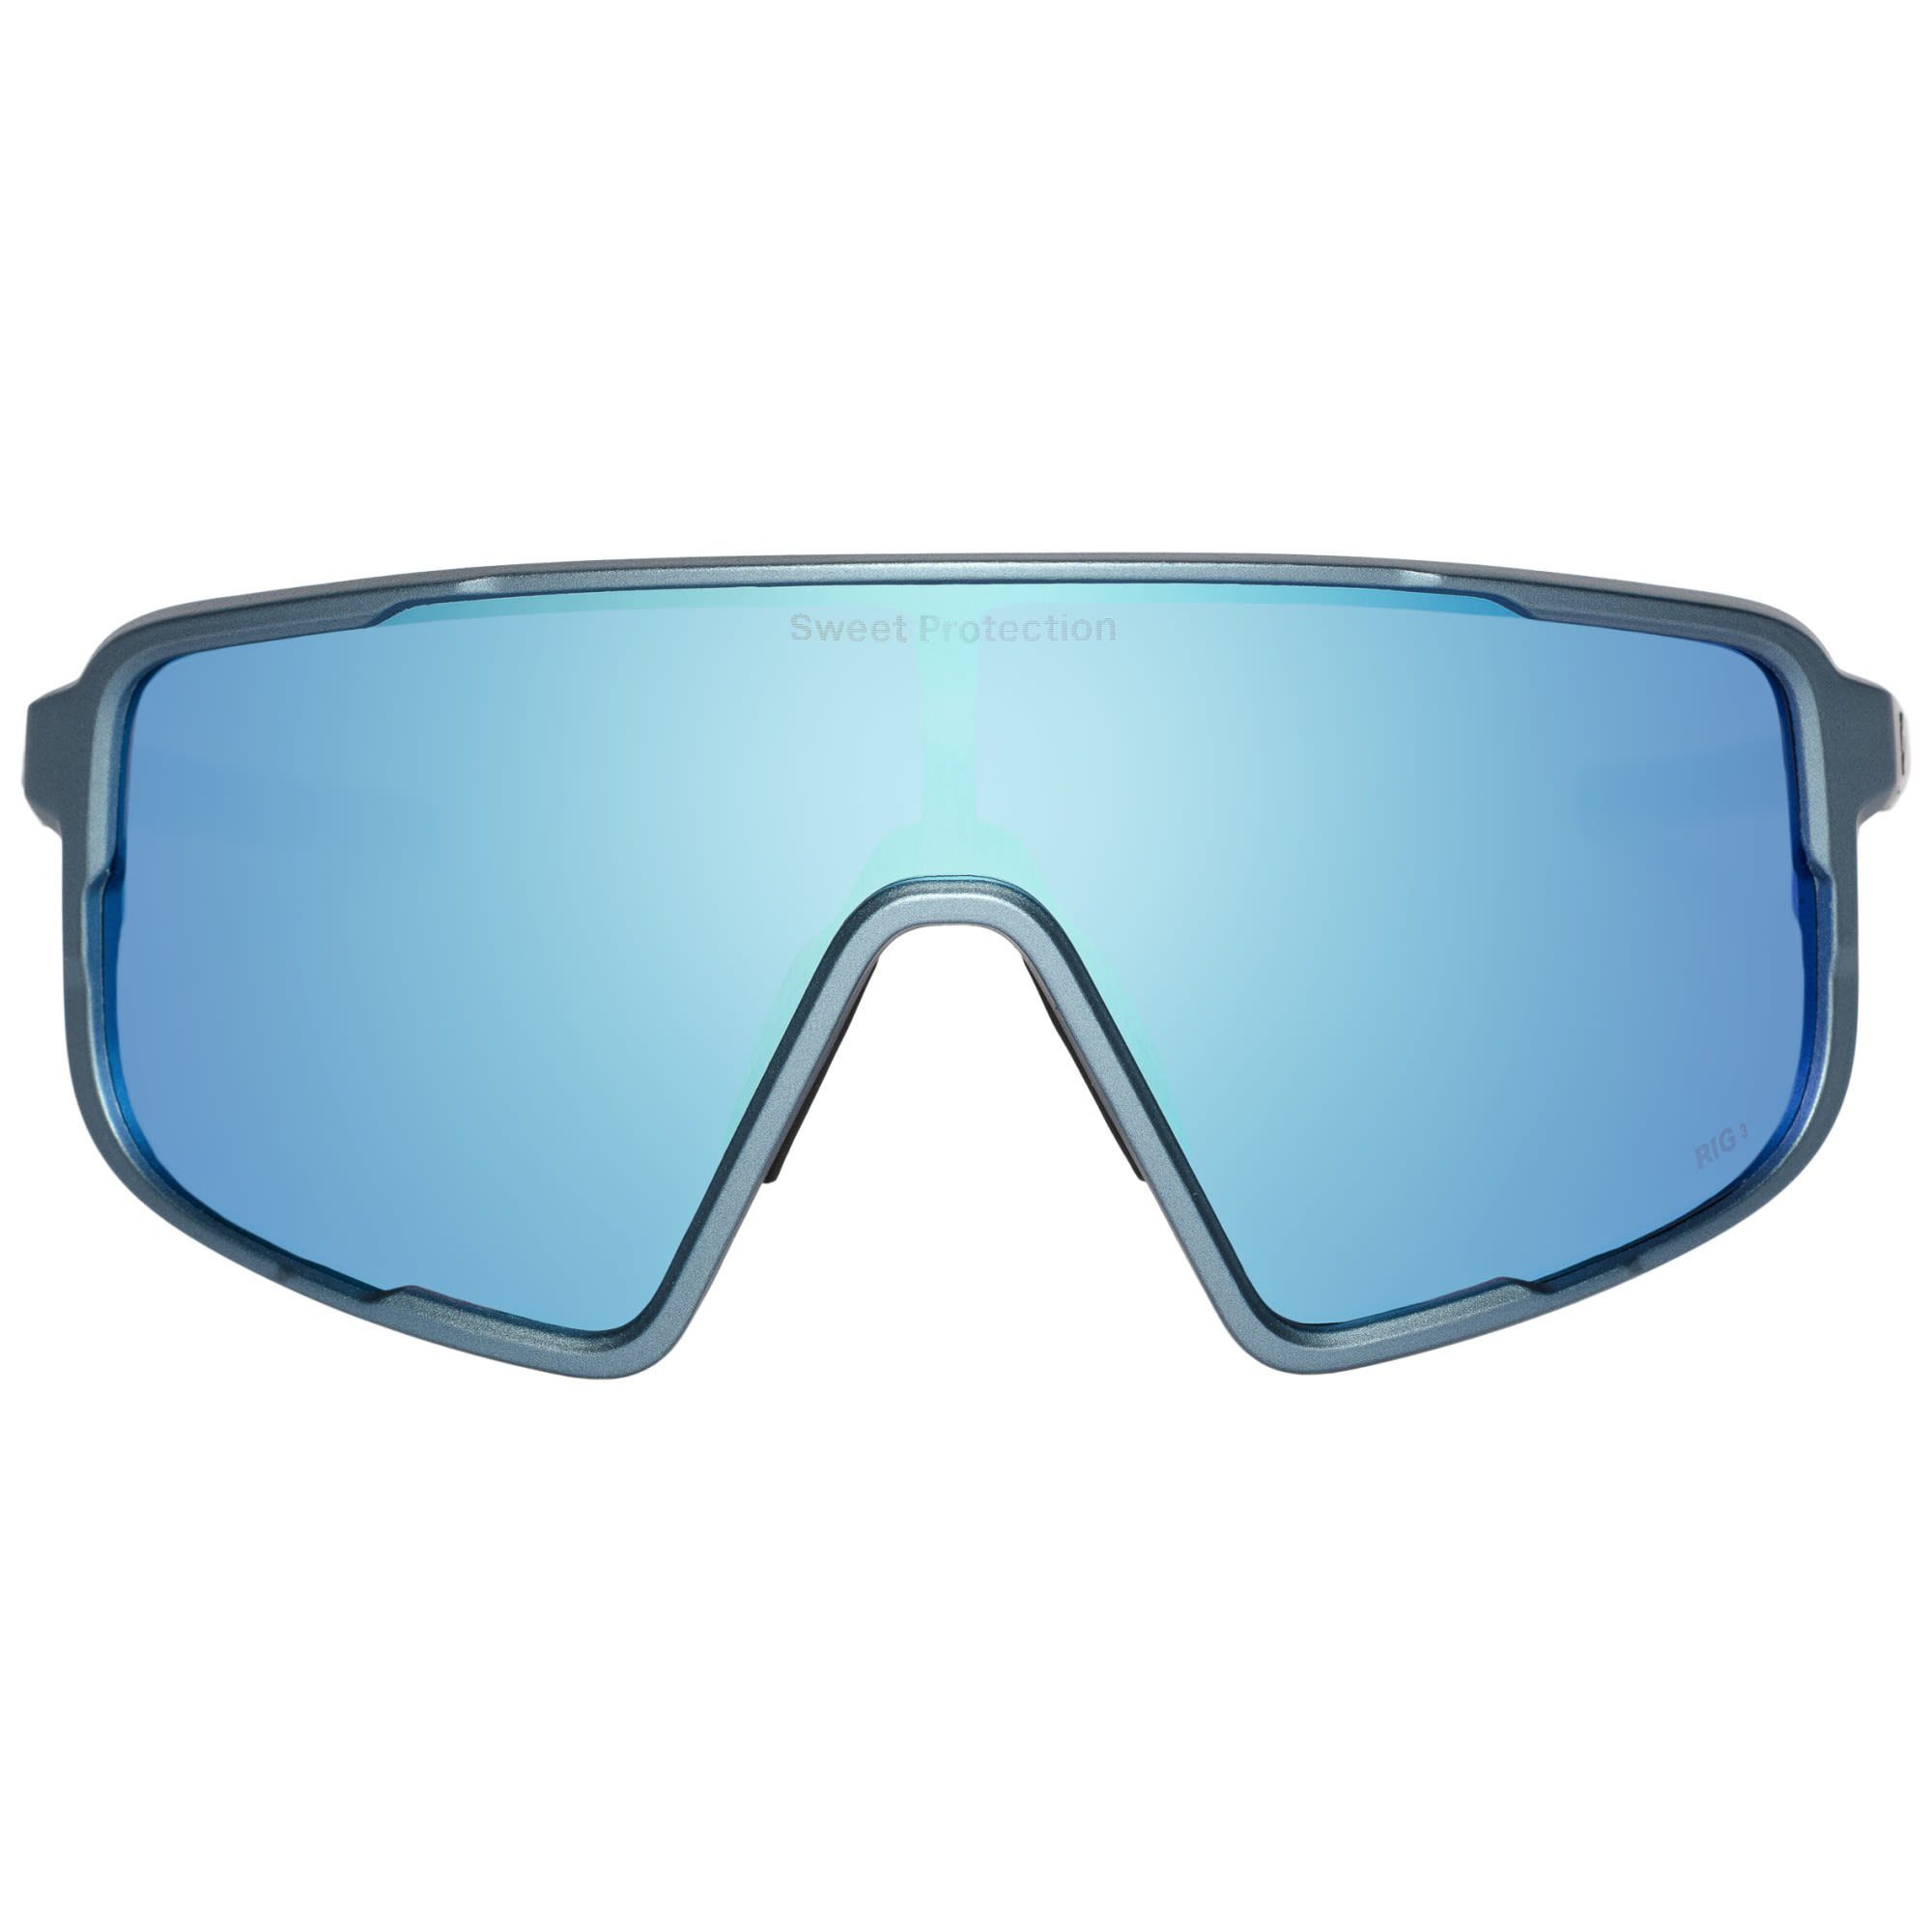 Sweet Metallic Protection Memento RIG Flare Sweet Reflect Sportbrille Aquamarine Rig Protection - Accessoires